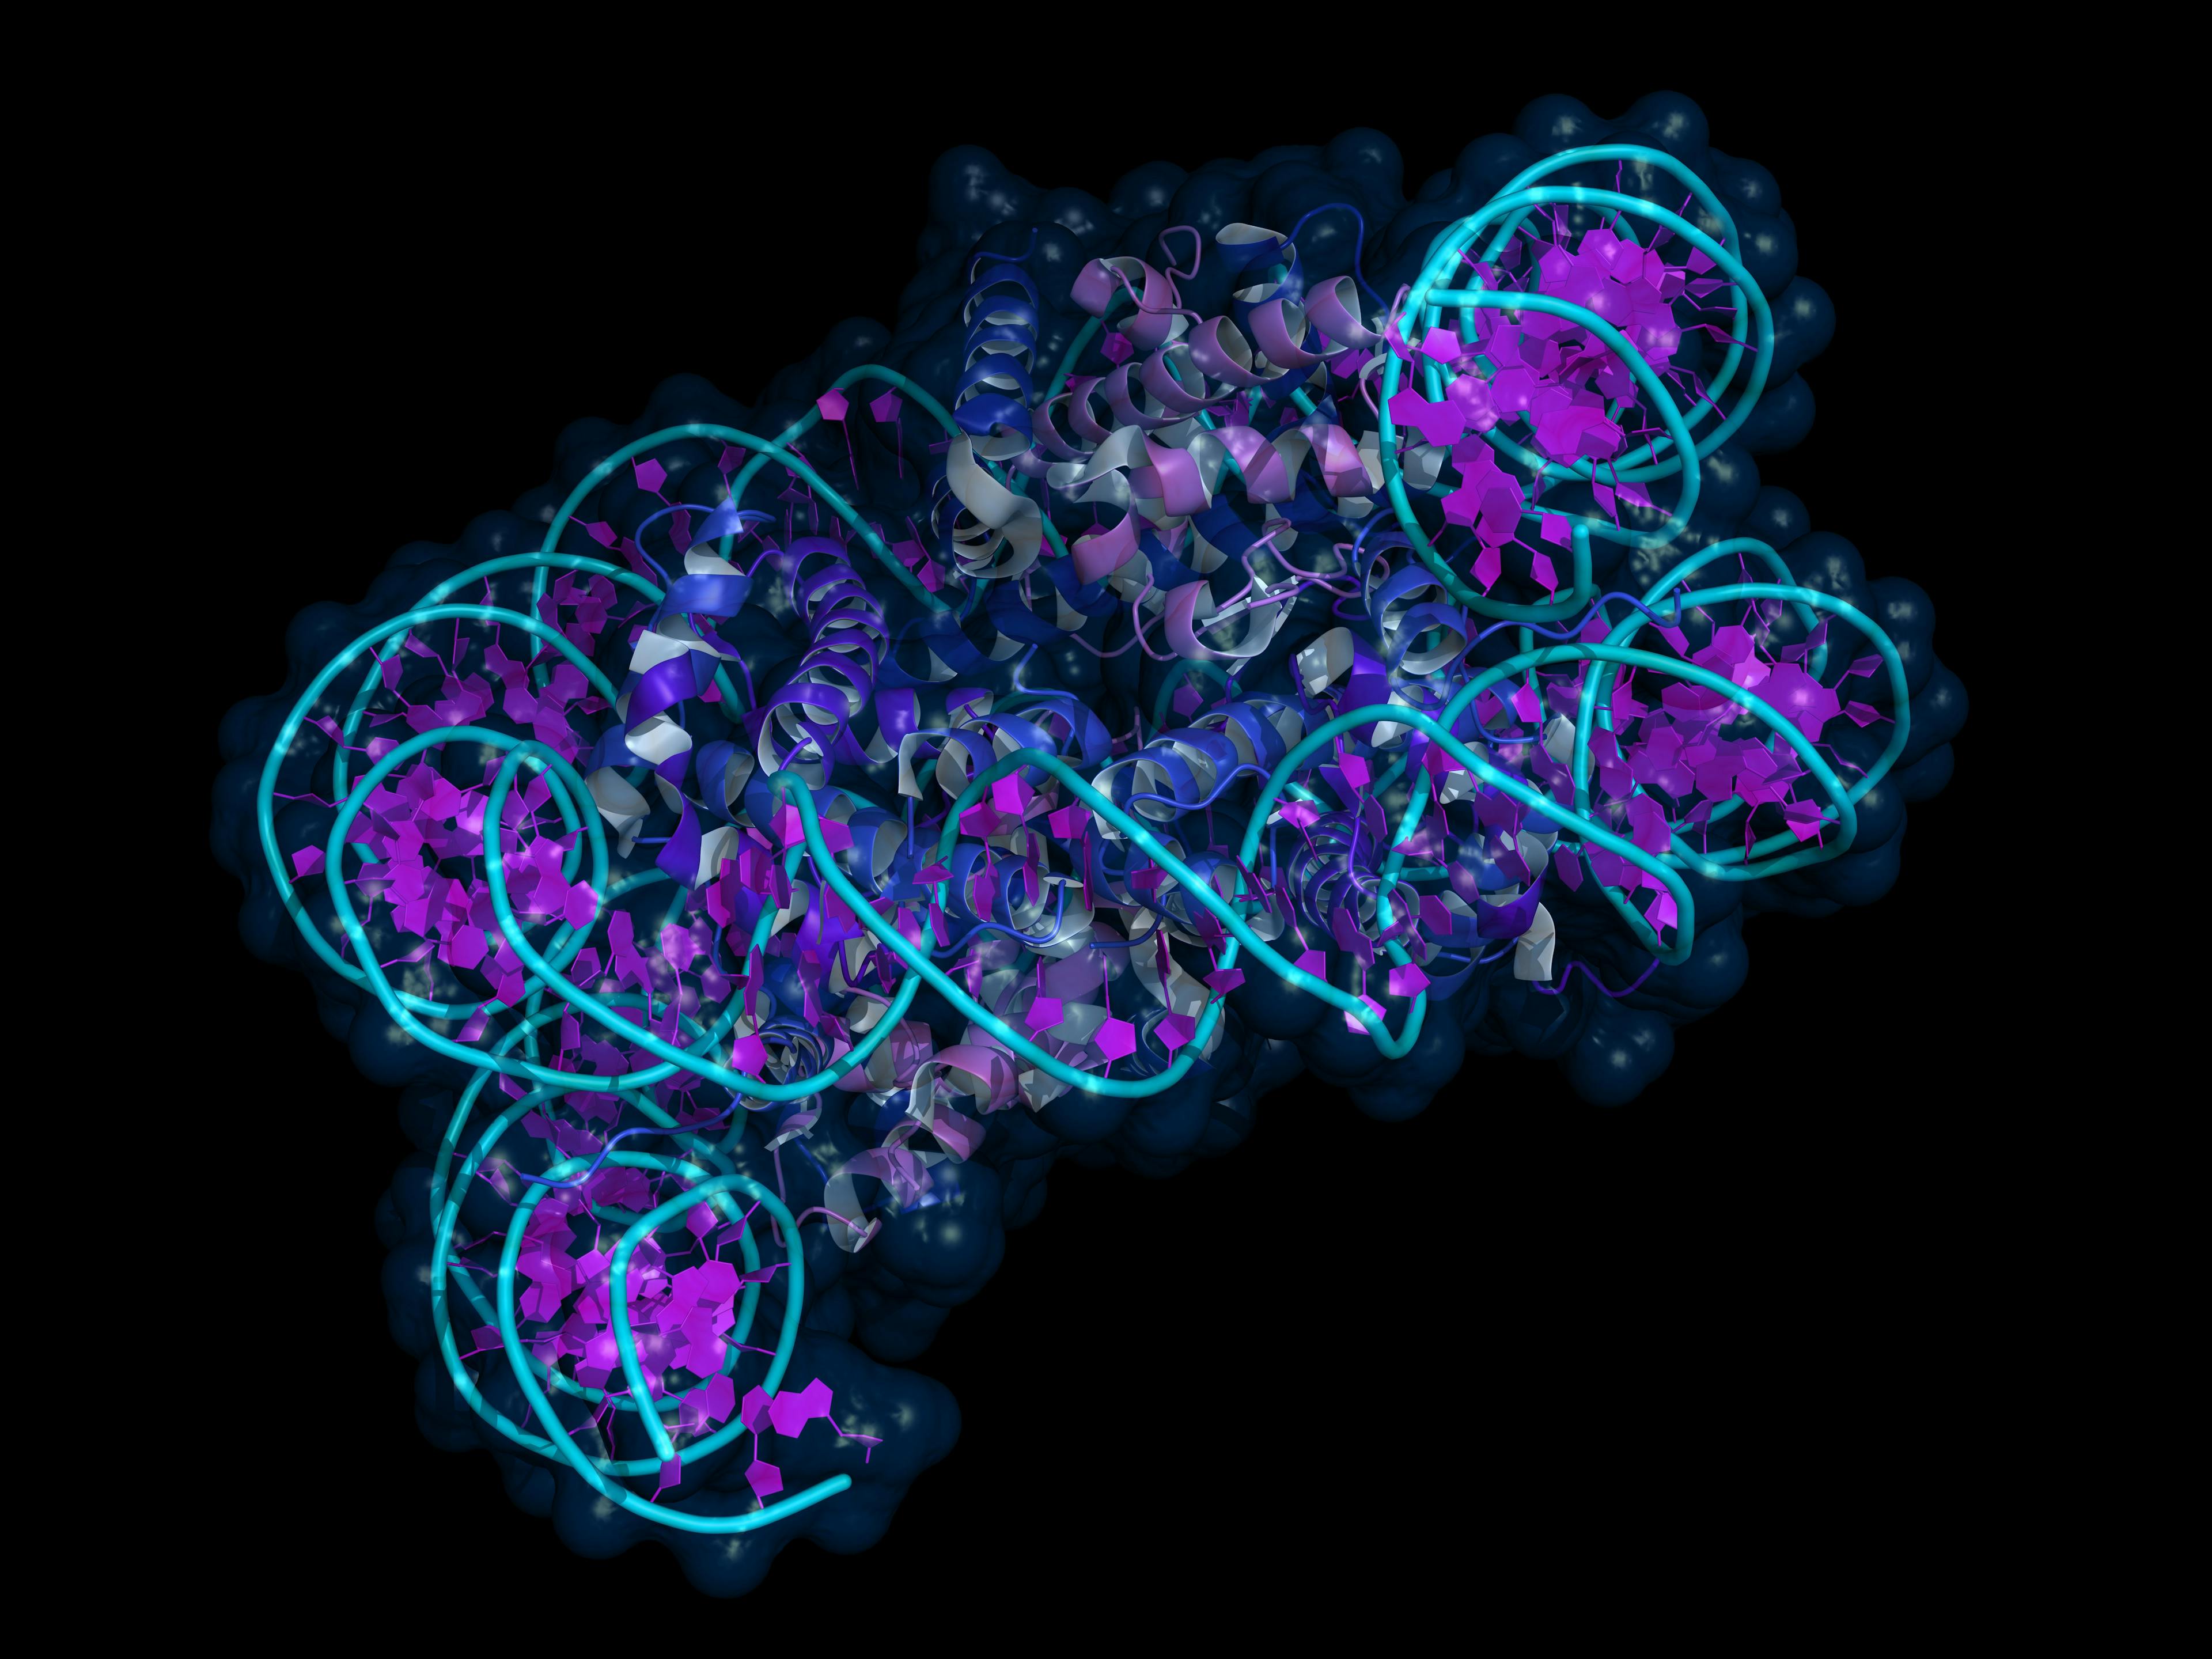 Nucleosome is a basic unit of DNA packaging in eukaryotic cells, with 147 nucleotides of DNA wrapped around the core built from histone proteins. | Image Credit: © petarg - stock.adobe.com